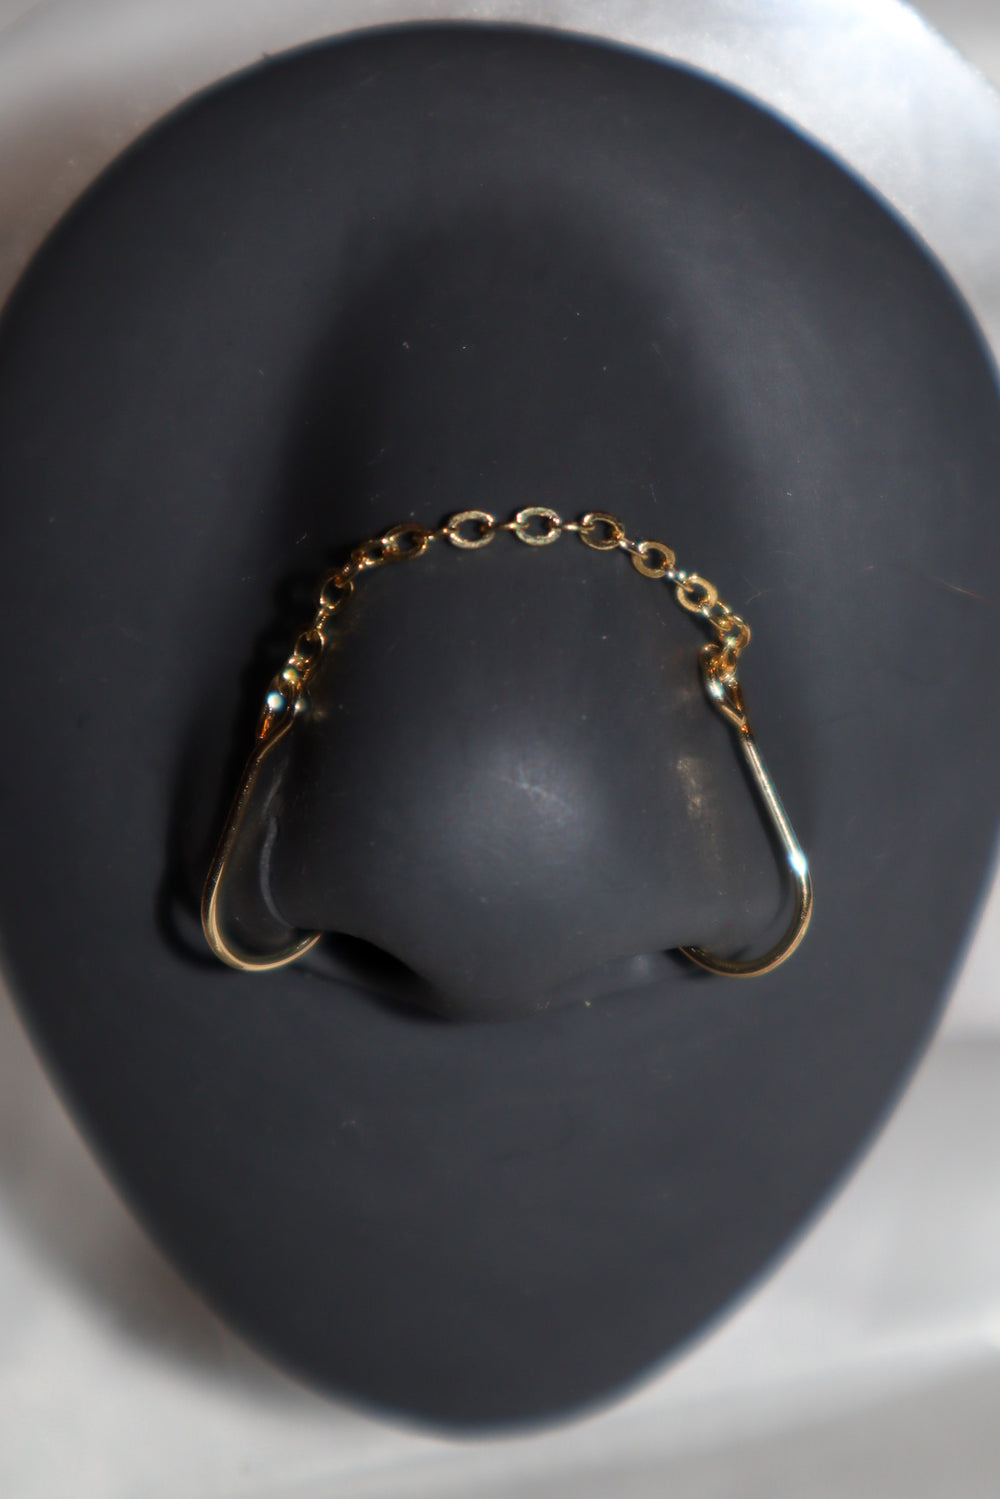 Connected Nose Chain Cuff